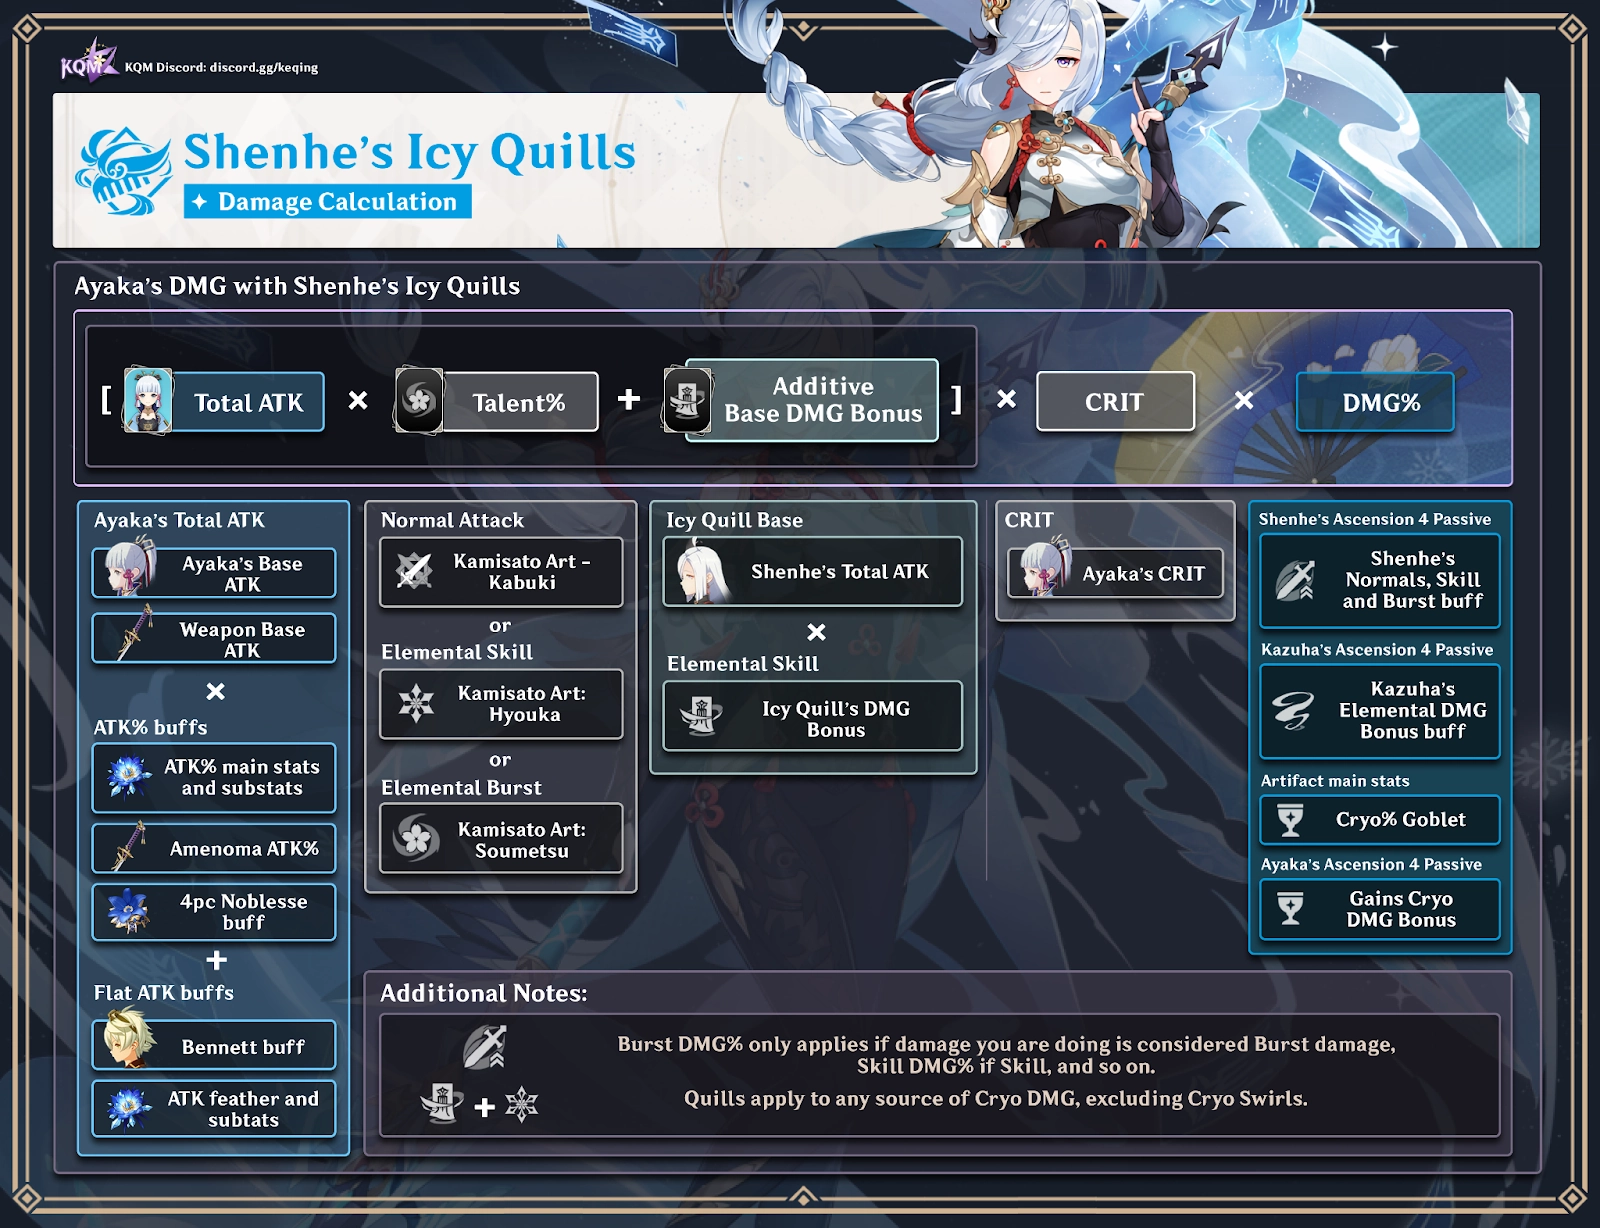 Shenhe's Icy Quill Procs Damage Calculation